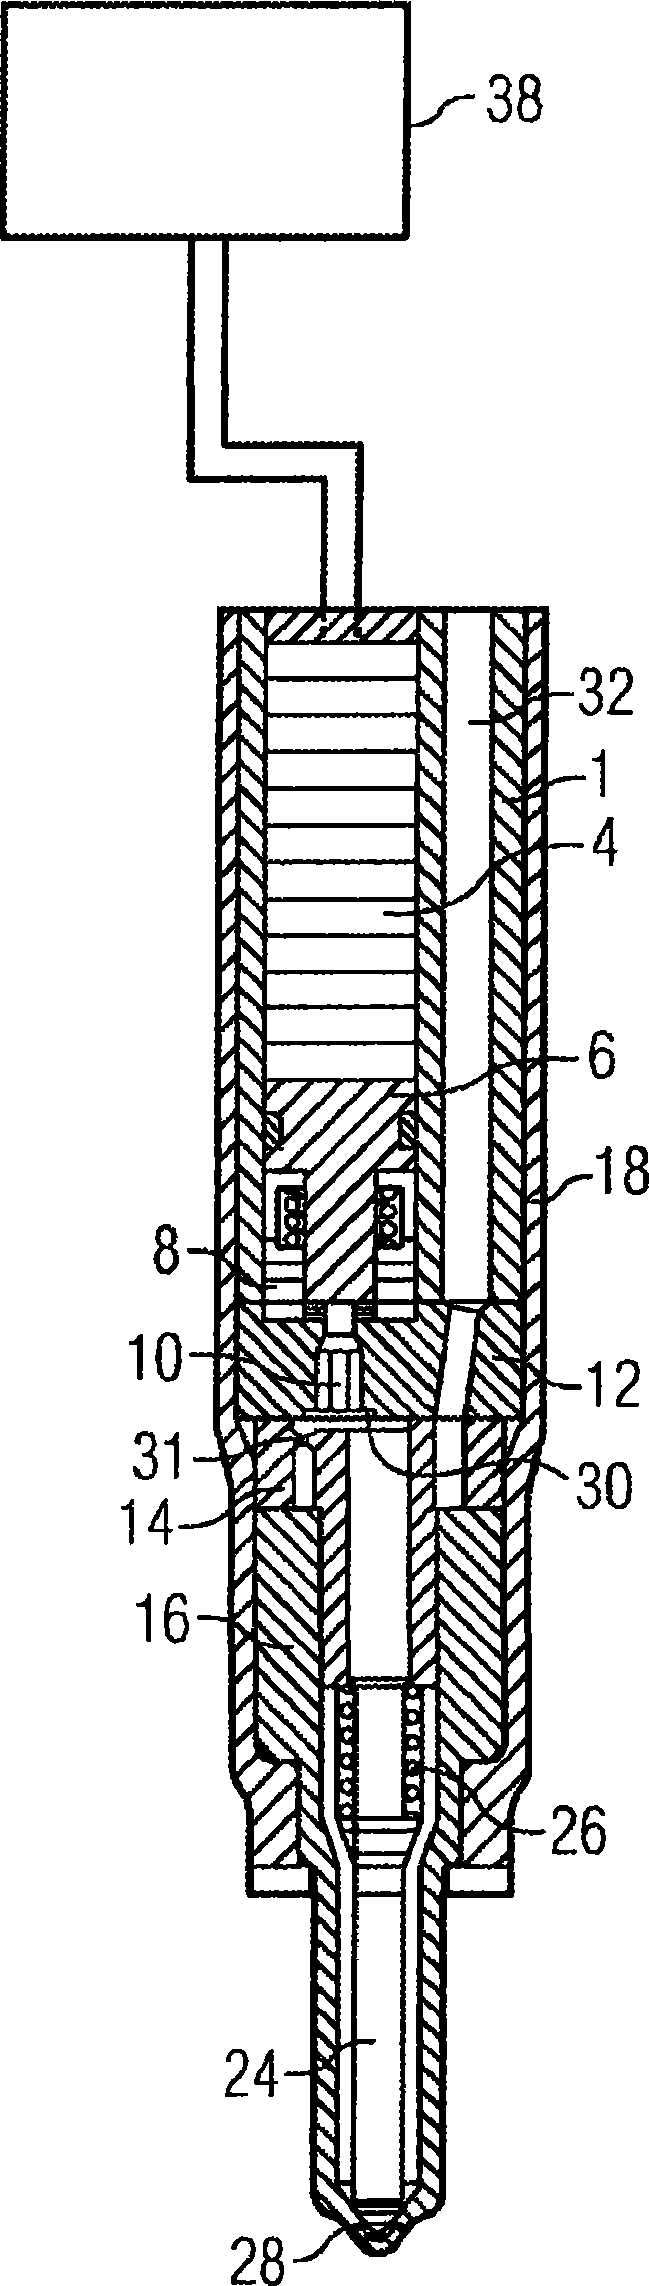 Current source, control device and method for operating said control device